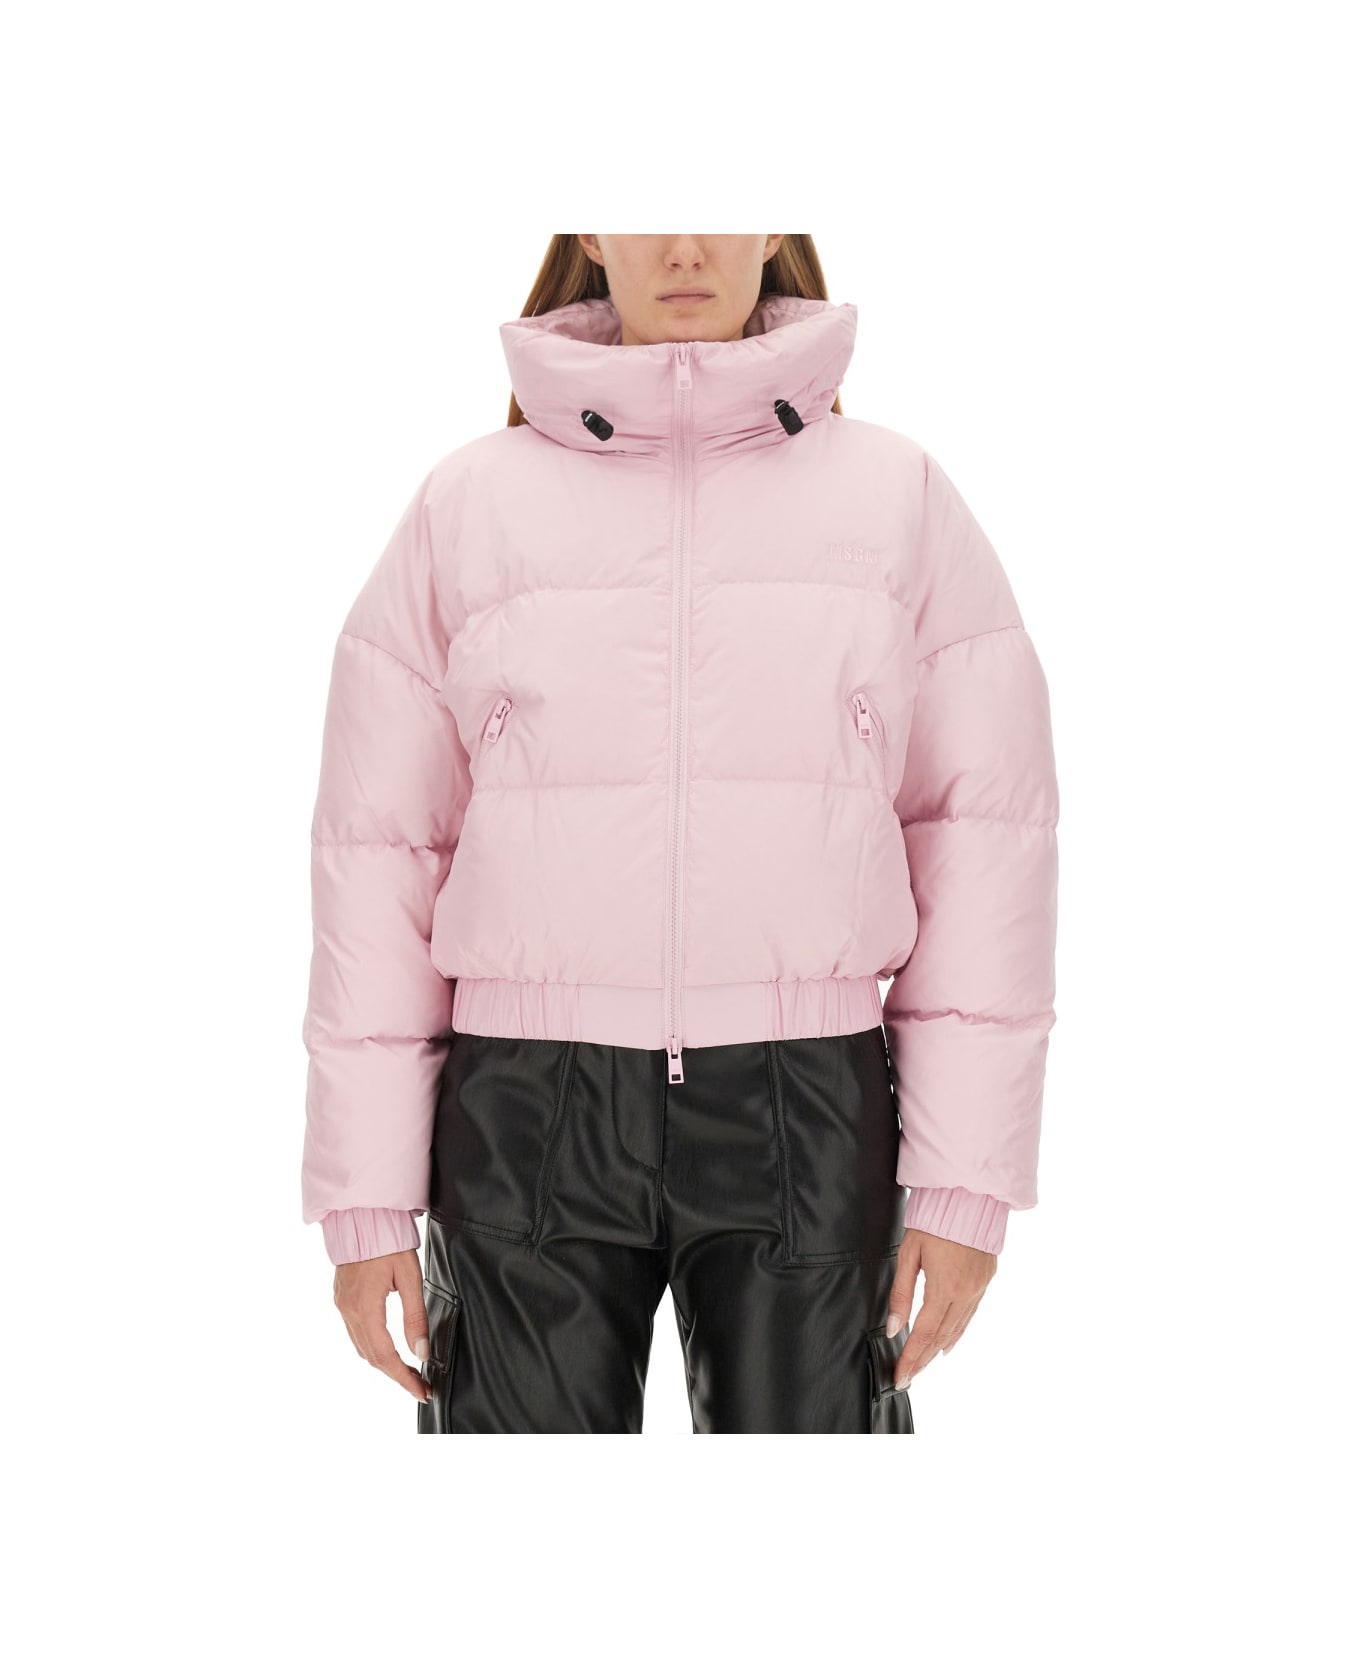 MSGM Cropped Fit Jacket - PINK